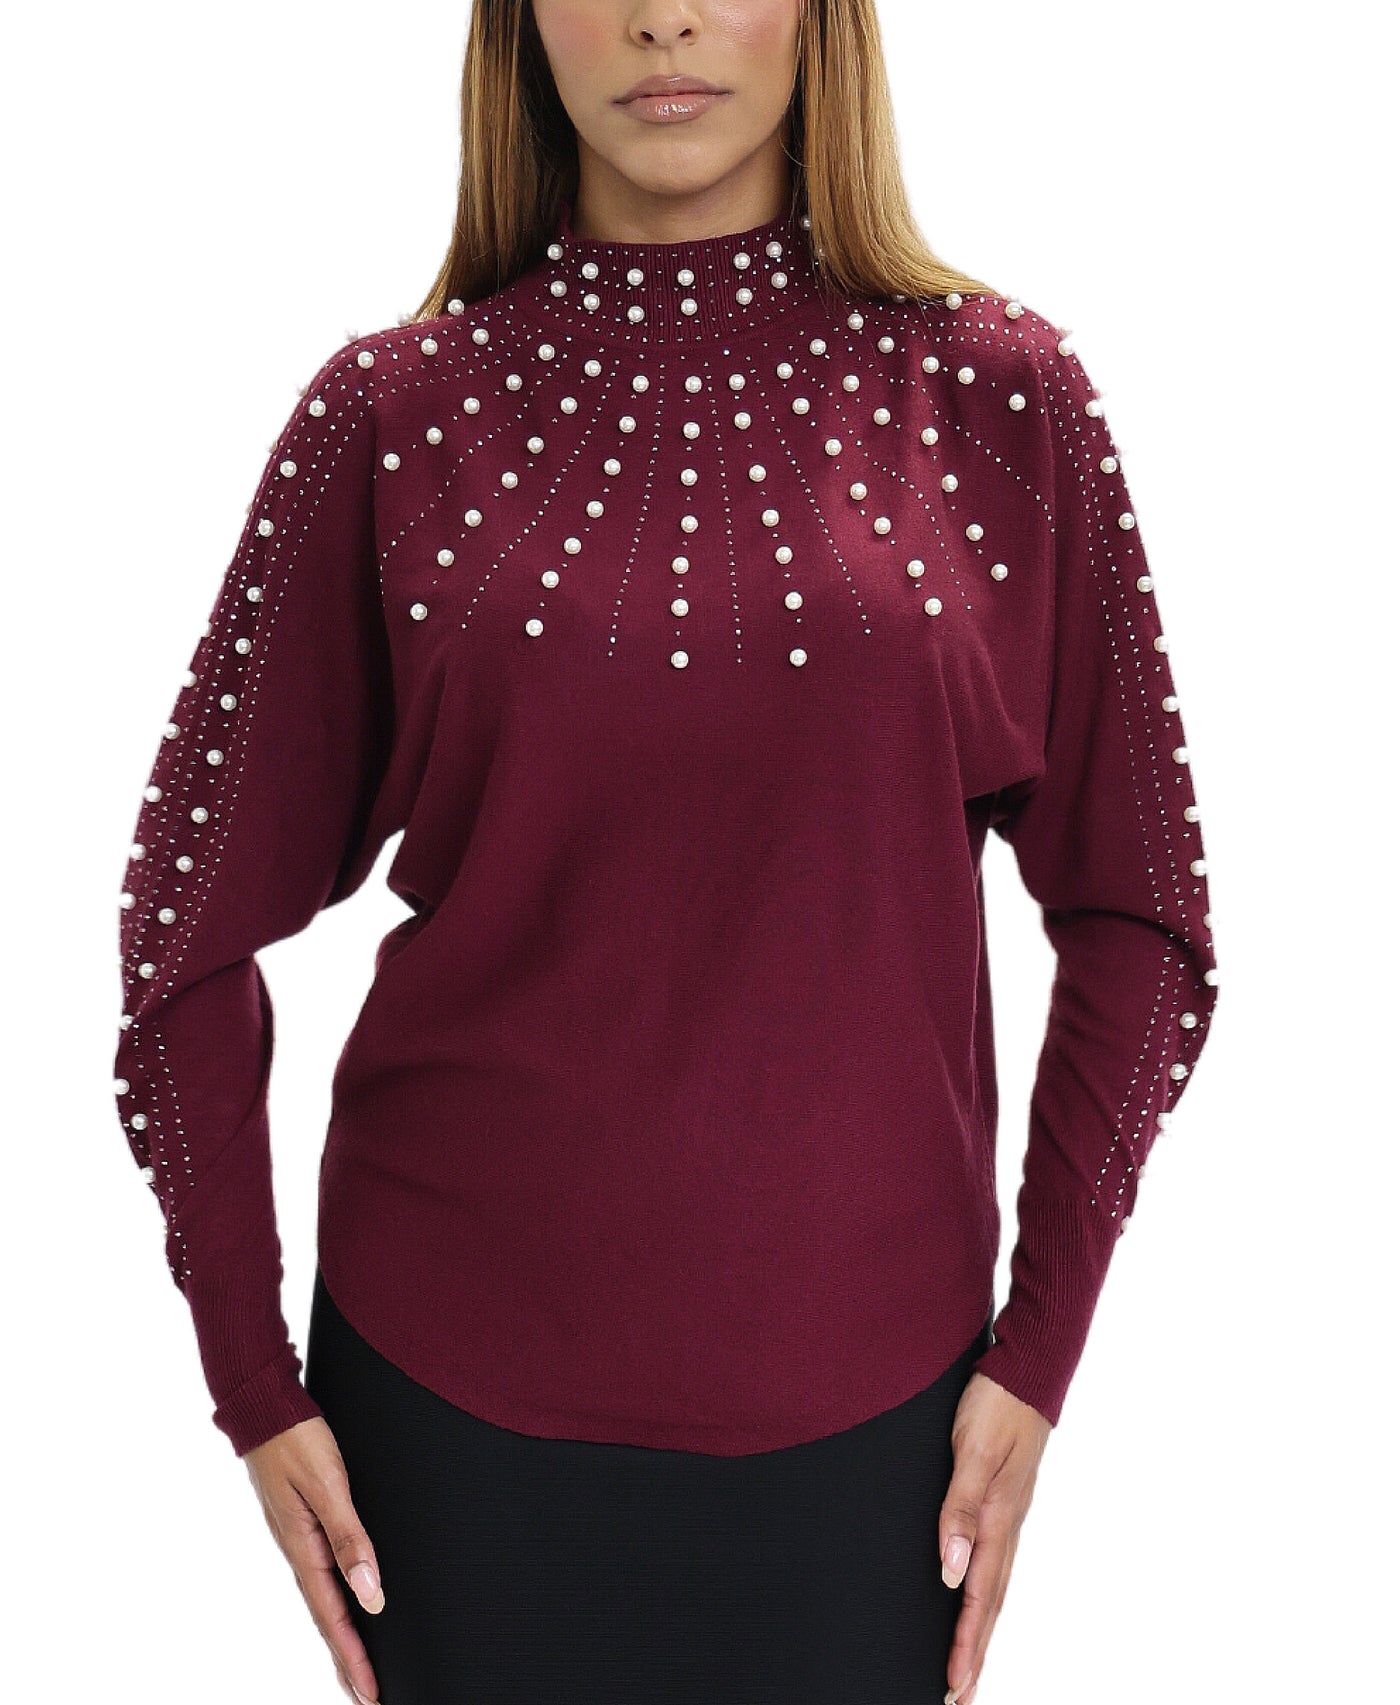 Pearl & Crystal Accent Sweater image 1